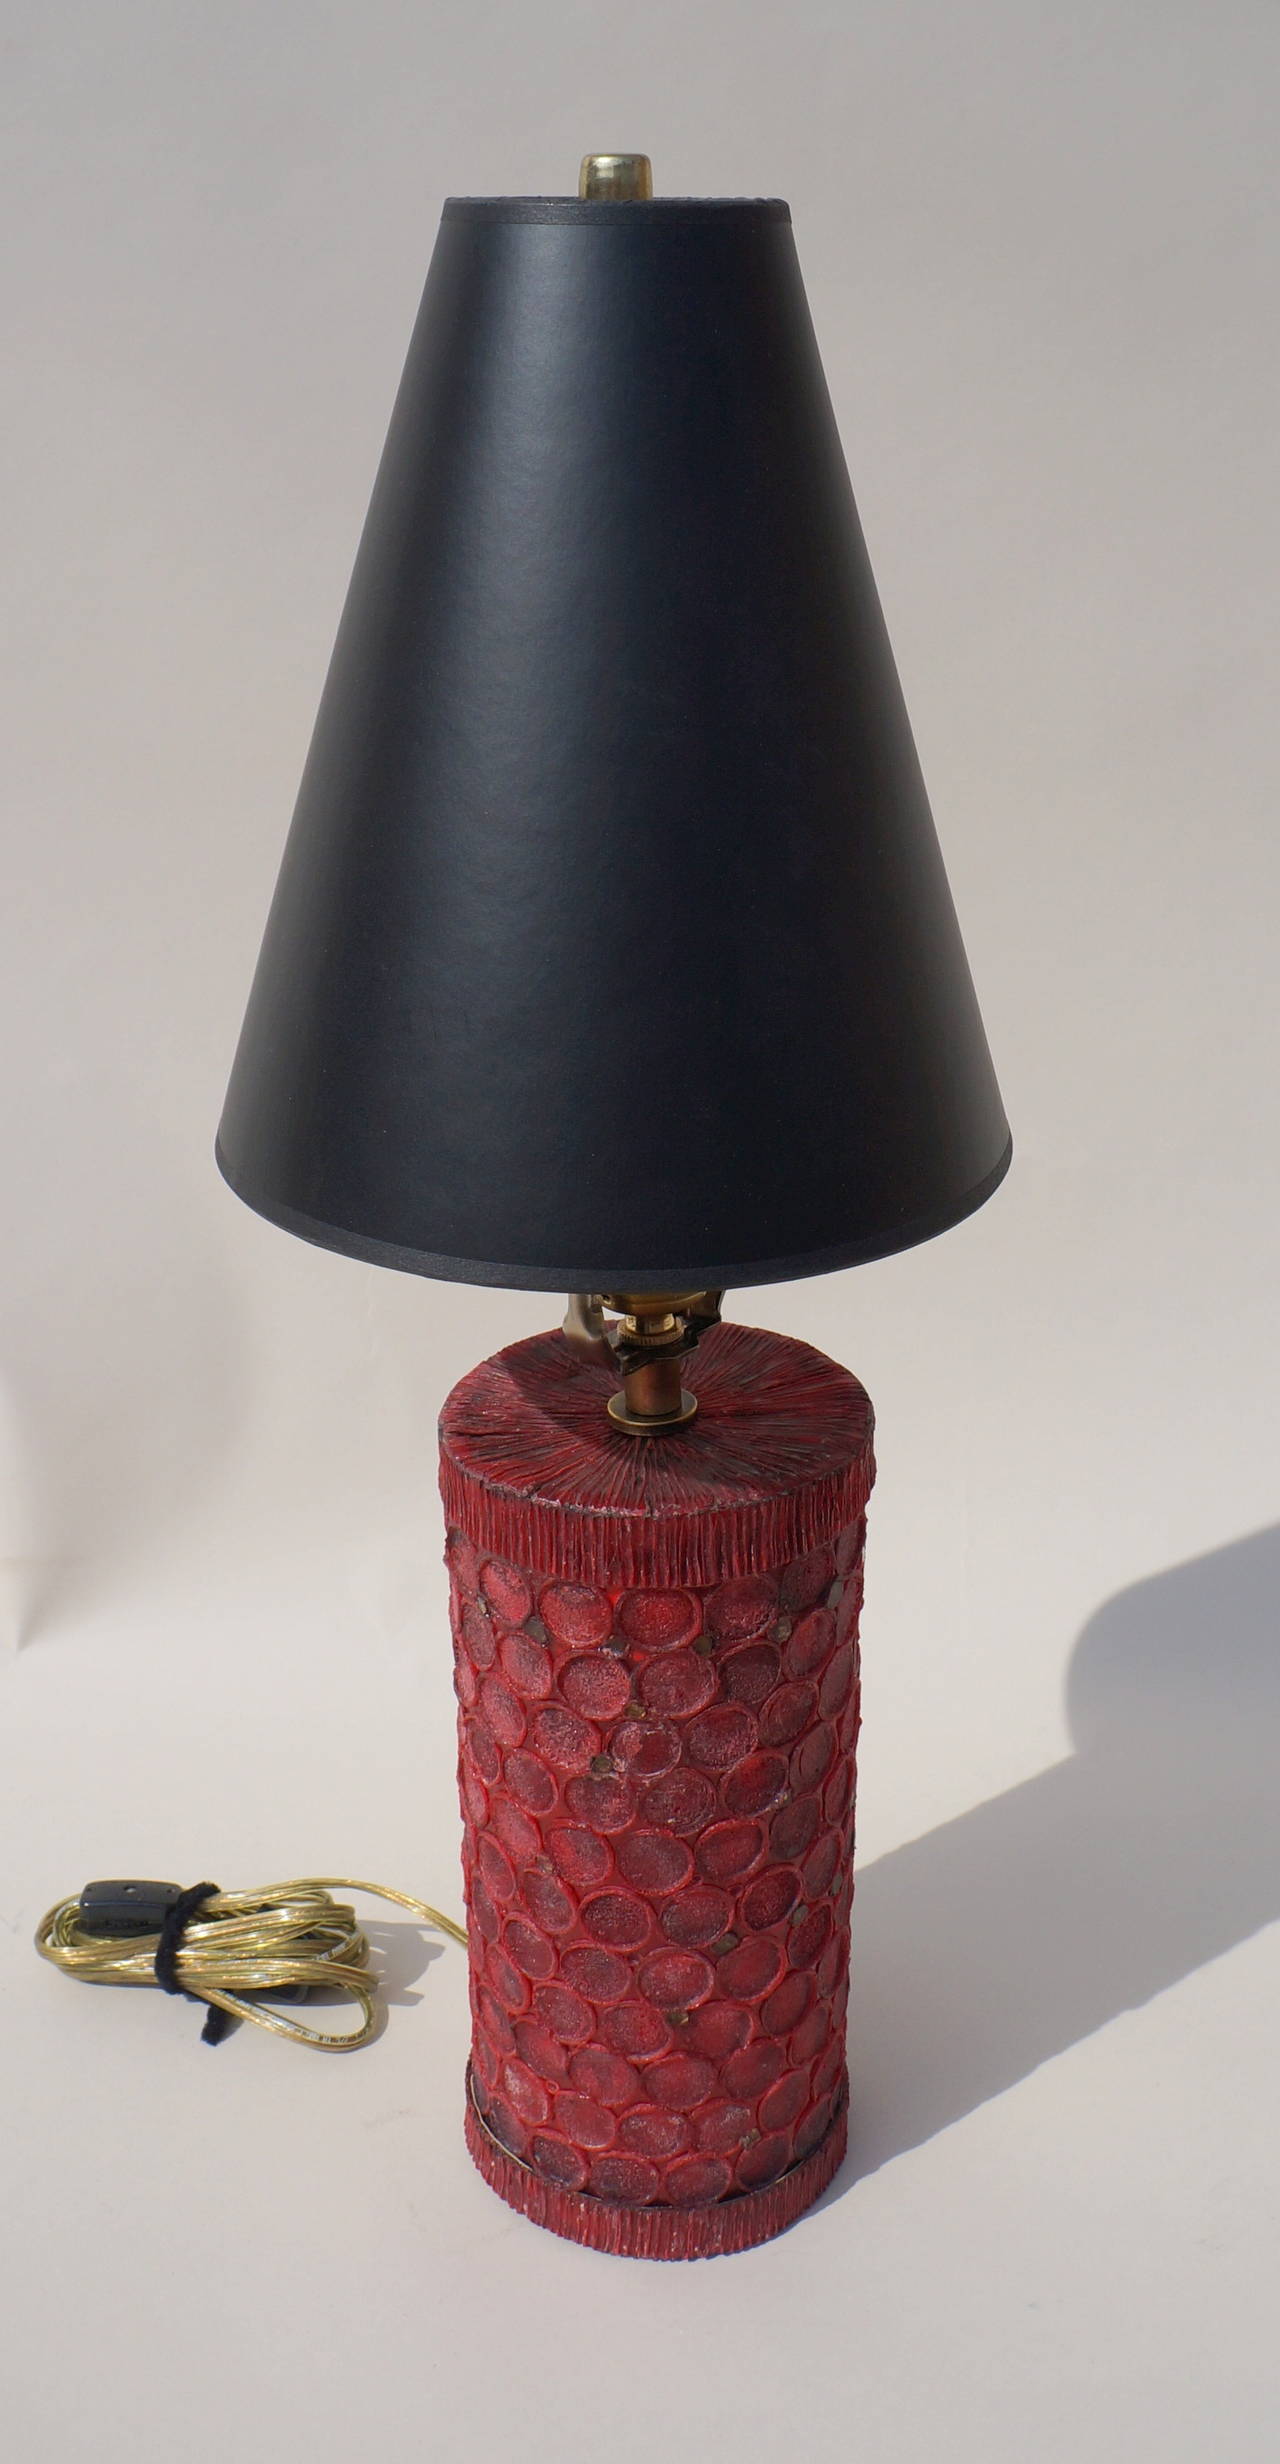 Table lamp in the manner of Line Vautrin. Located in NY. Rewired.